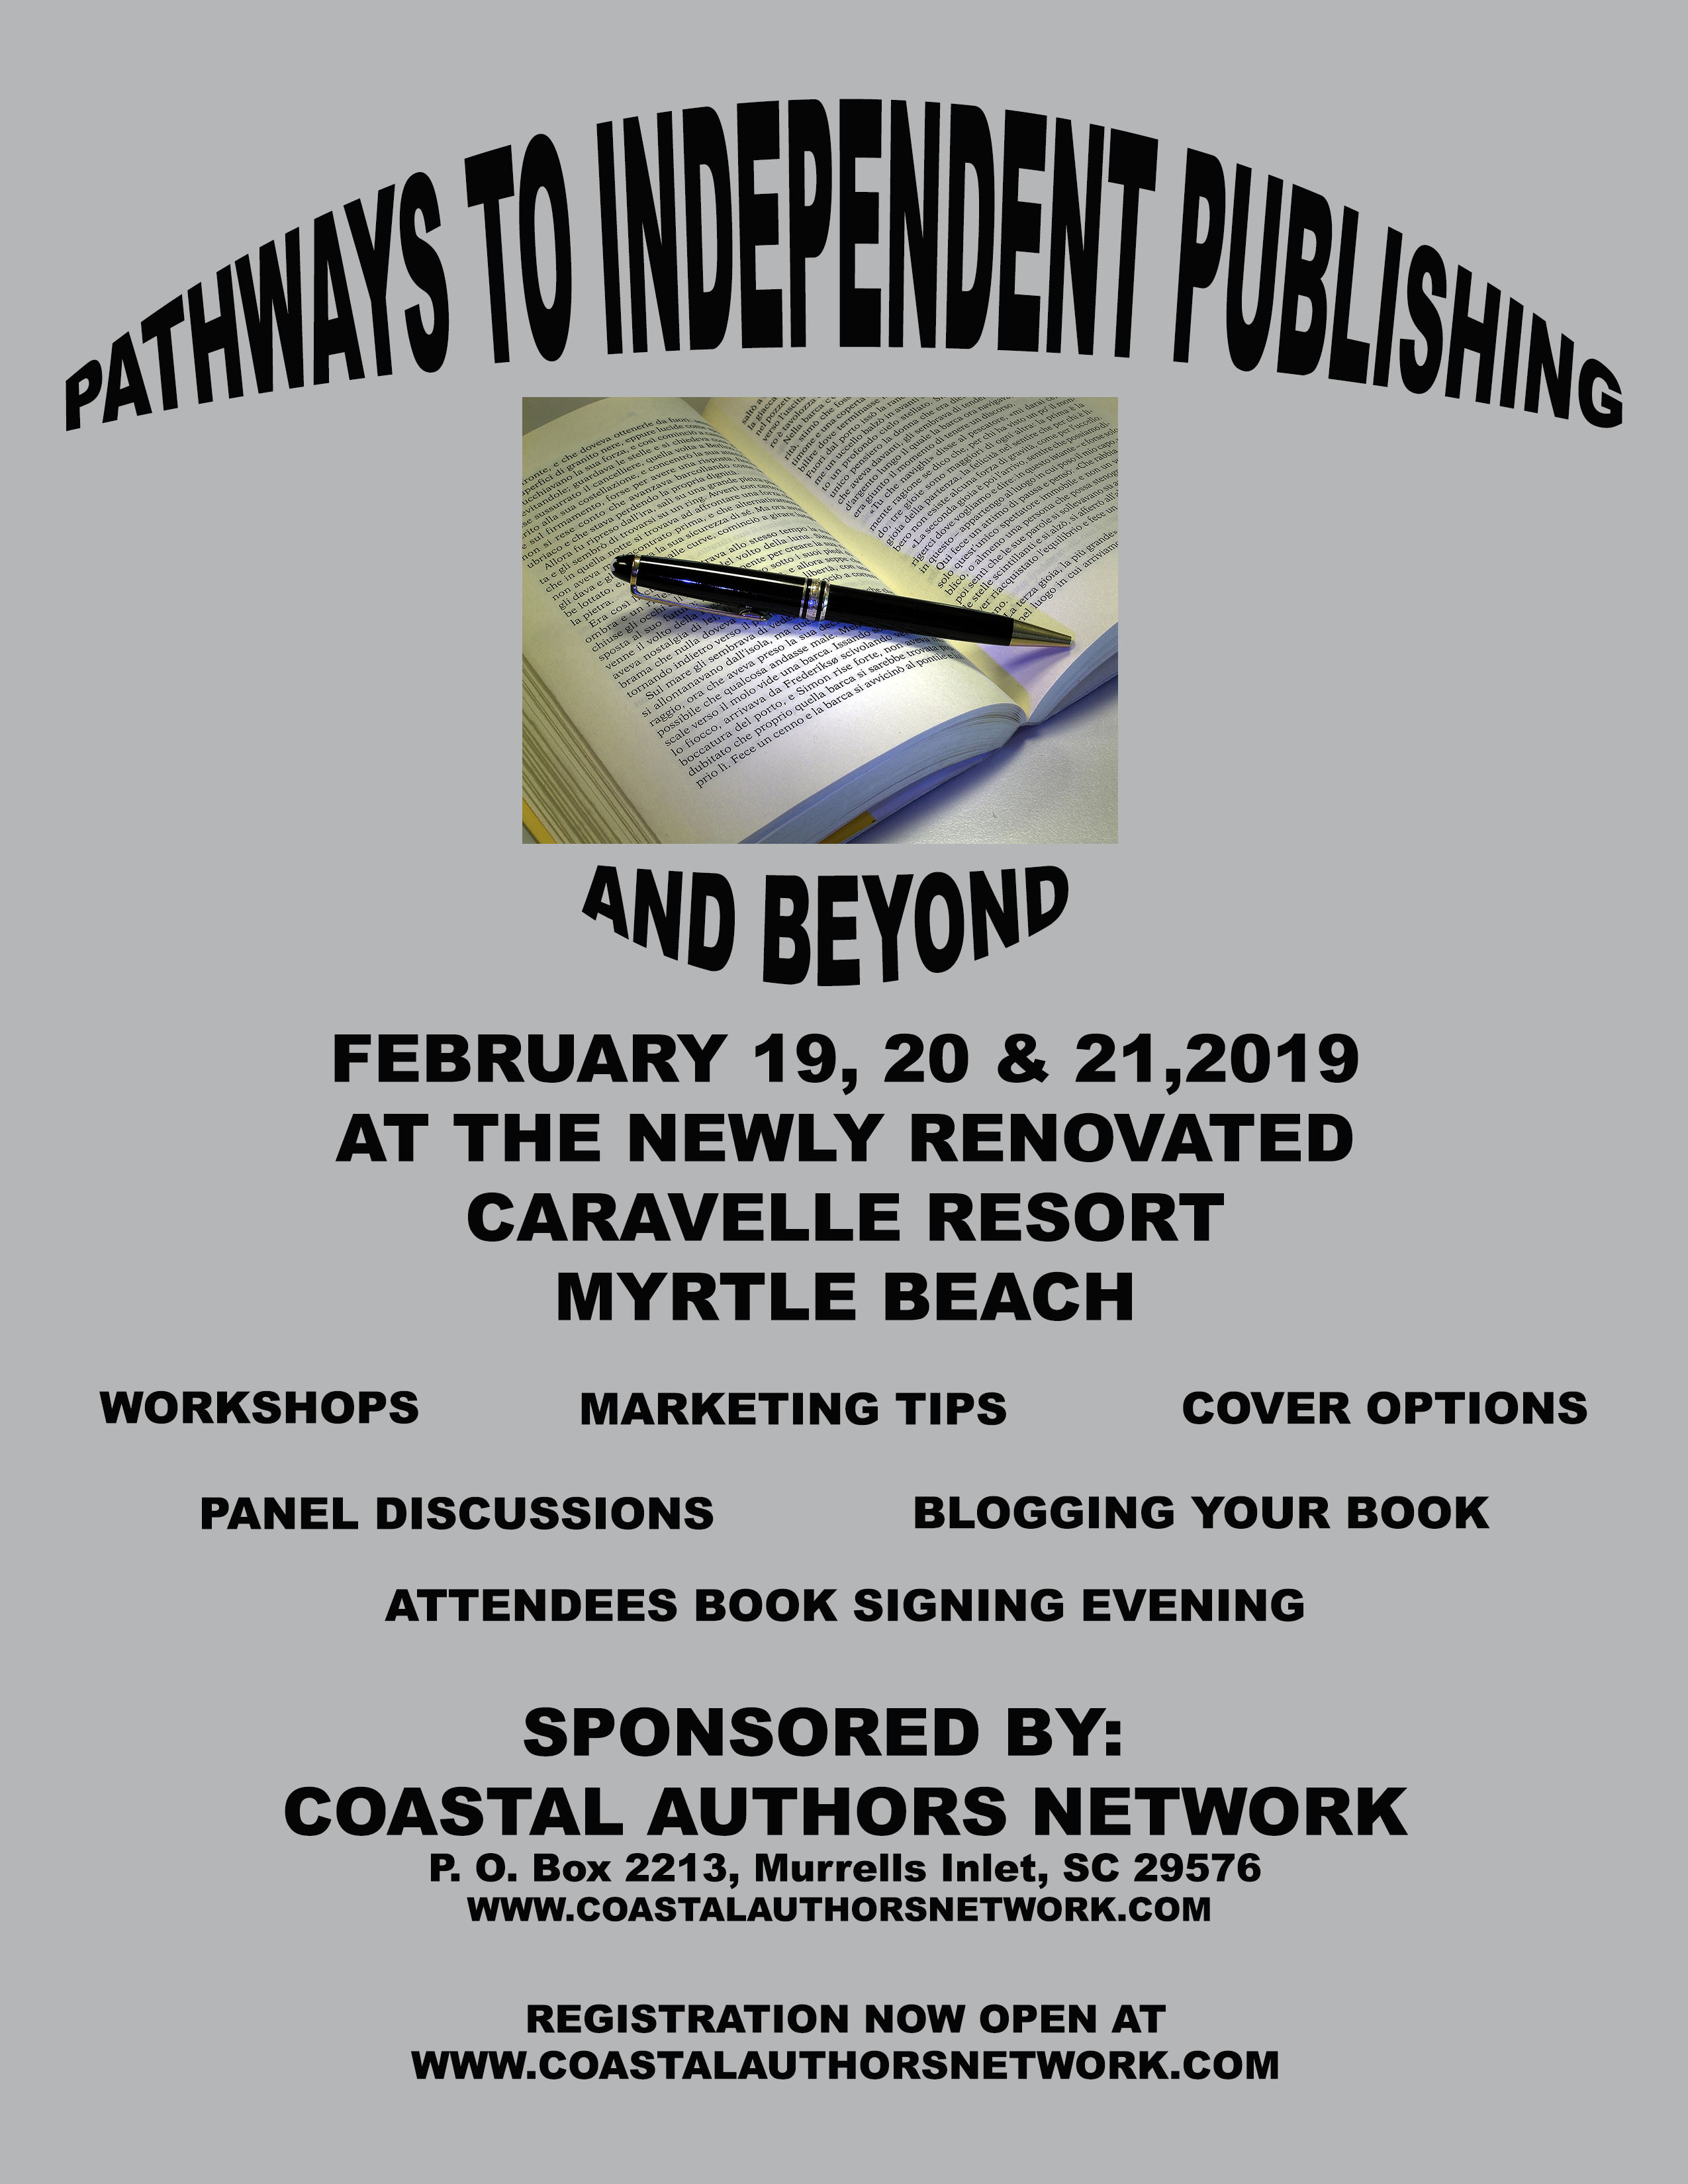 Pathways to Independent Publishing Conference